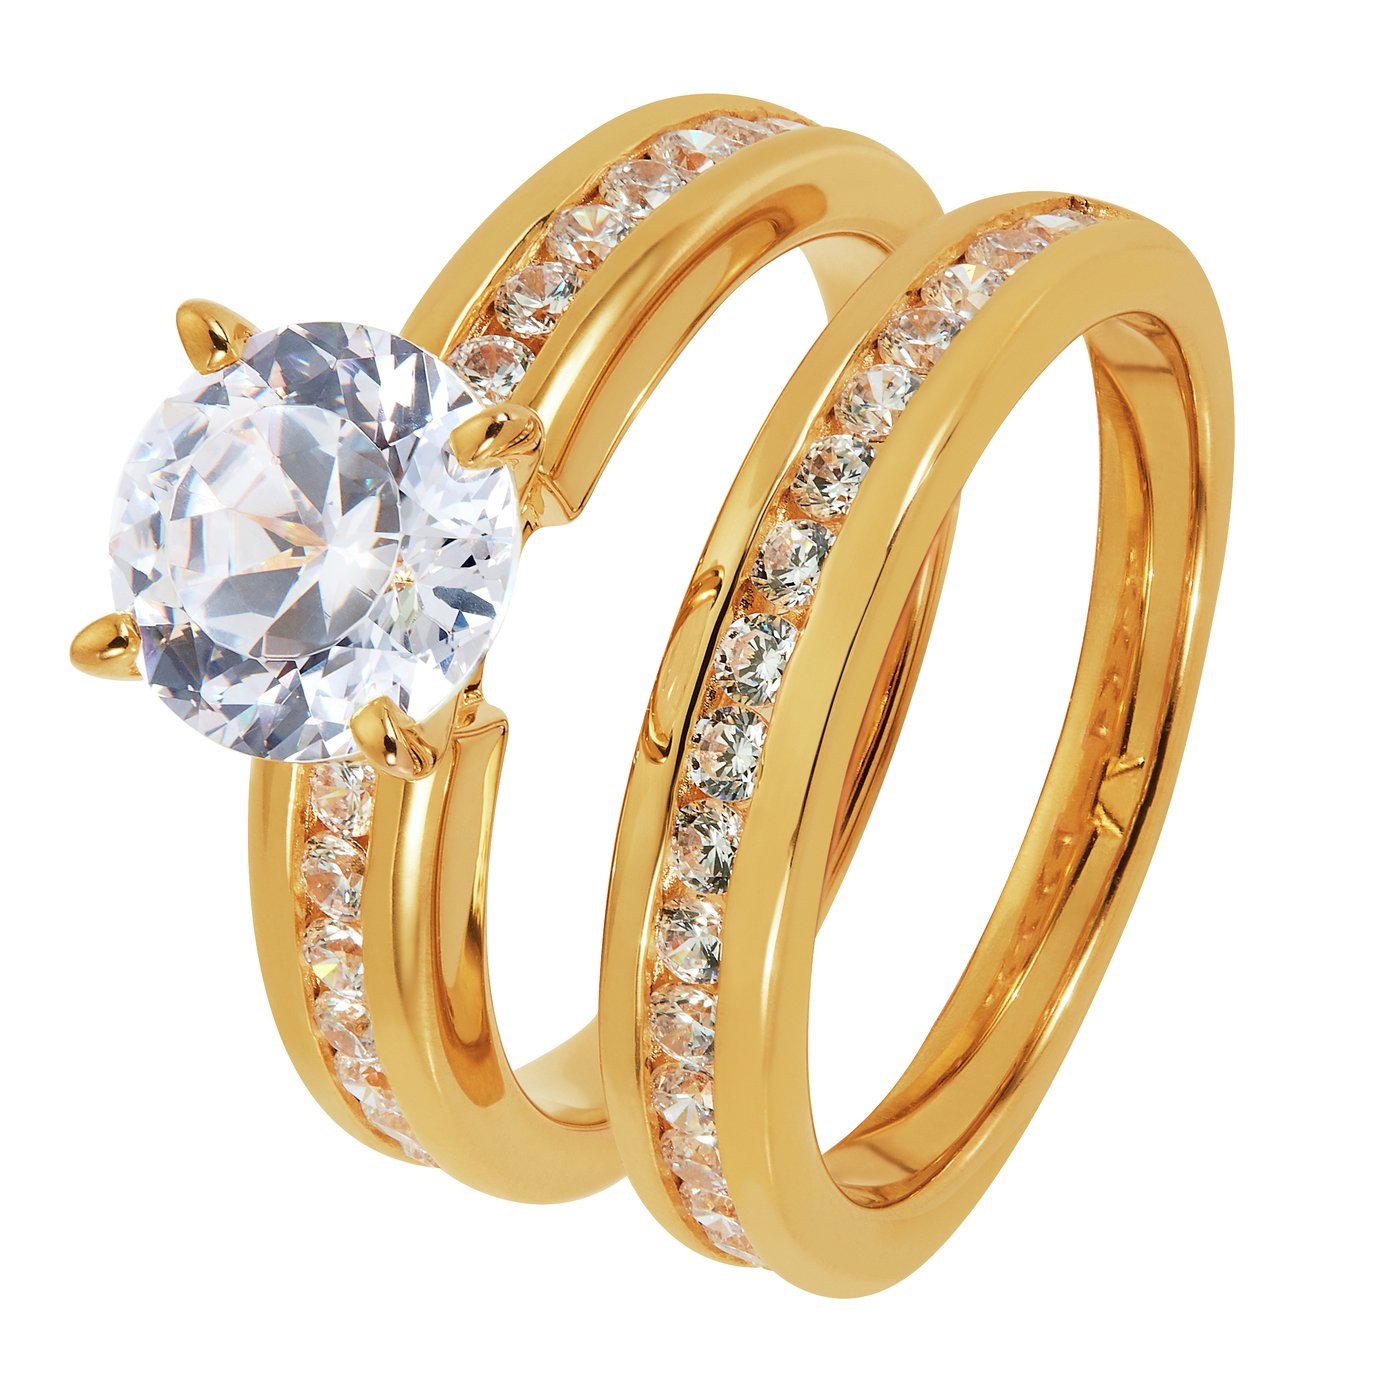 Revere 9ct Gold Plated Cubic Zirconia Bridal Ring Set - I